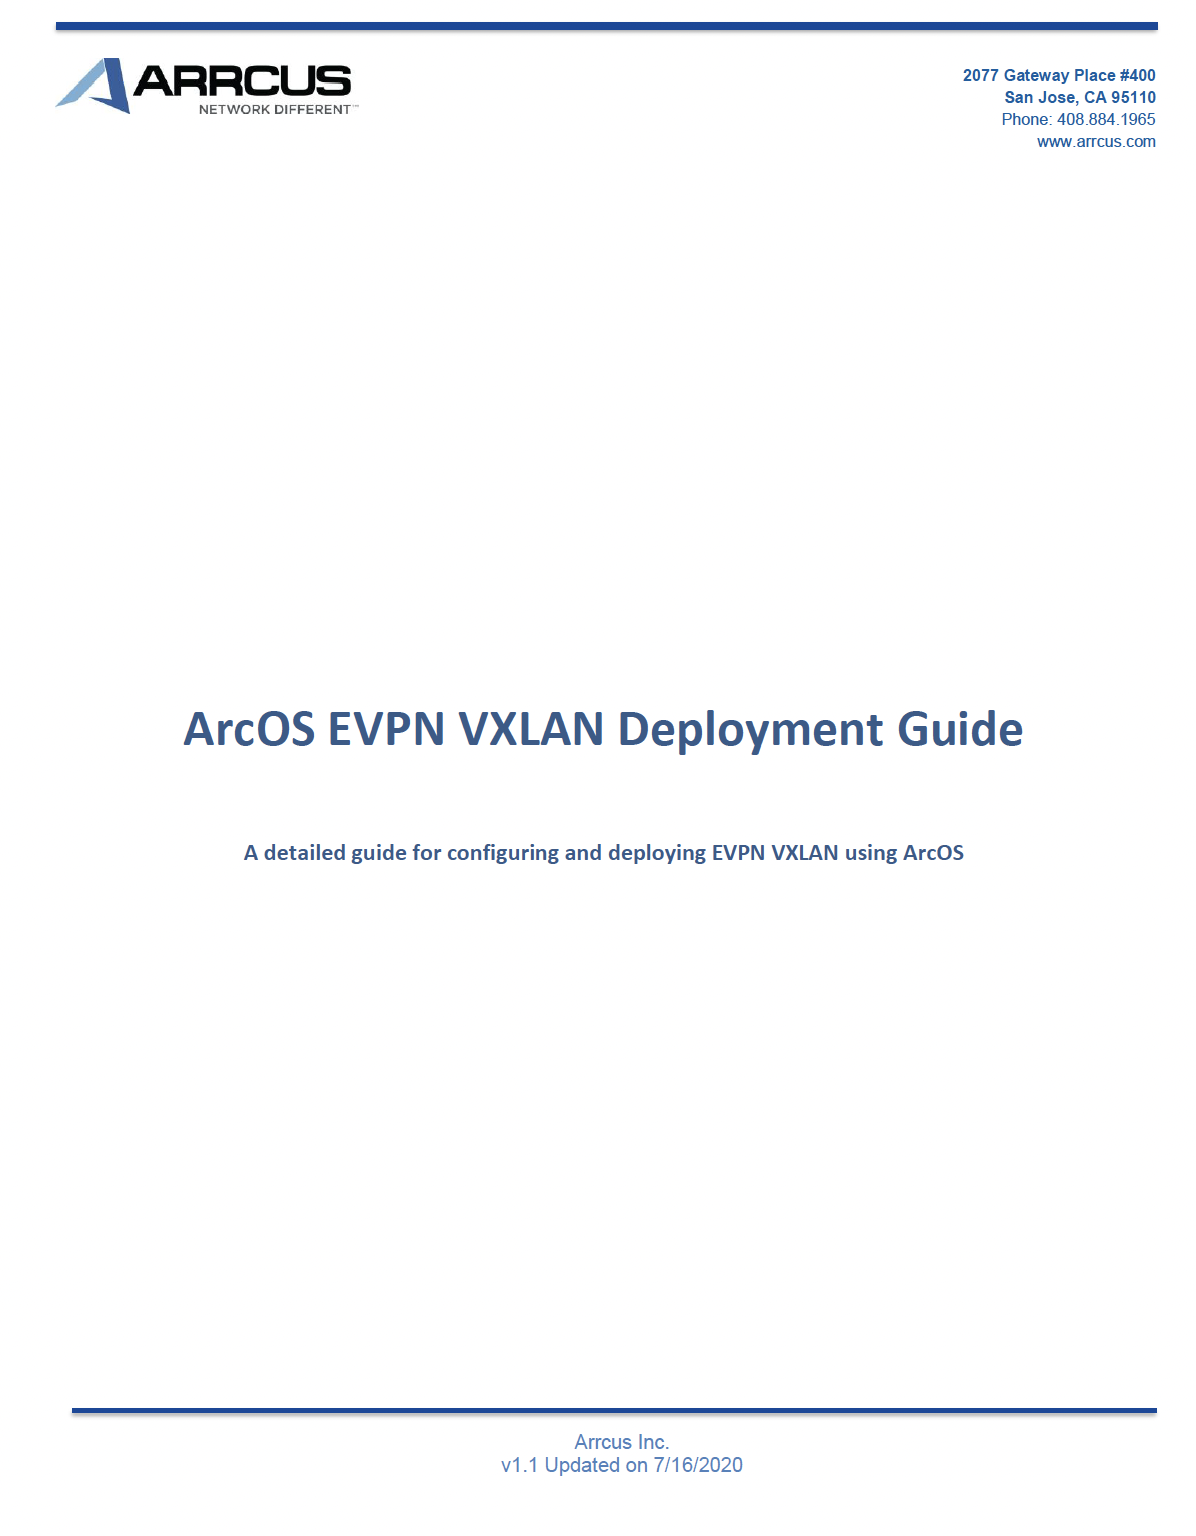 Building a multi-tenant fabric with EVPN VXLAN using ArcOS